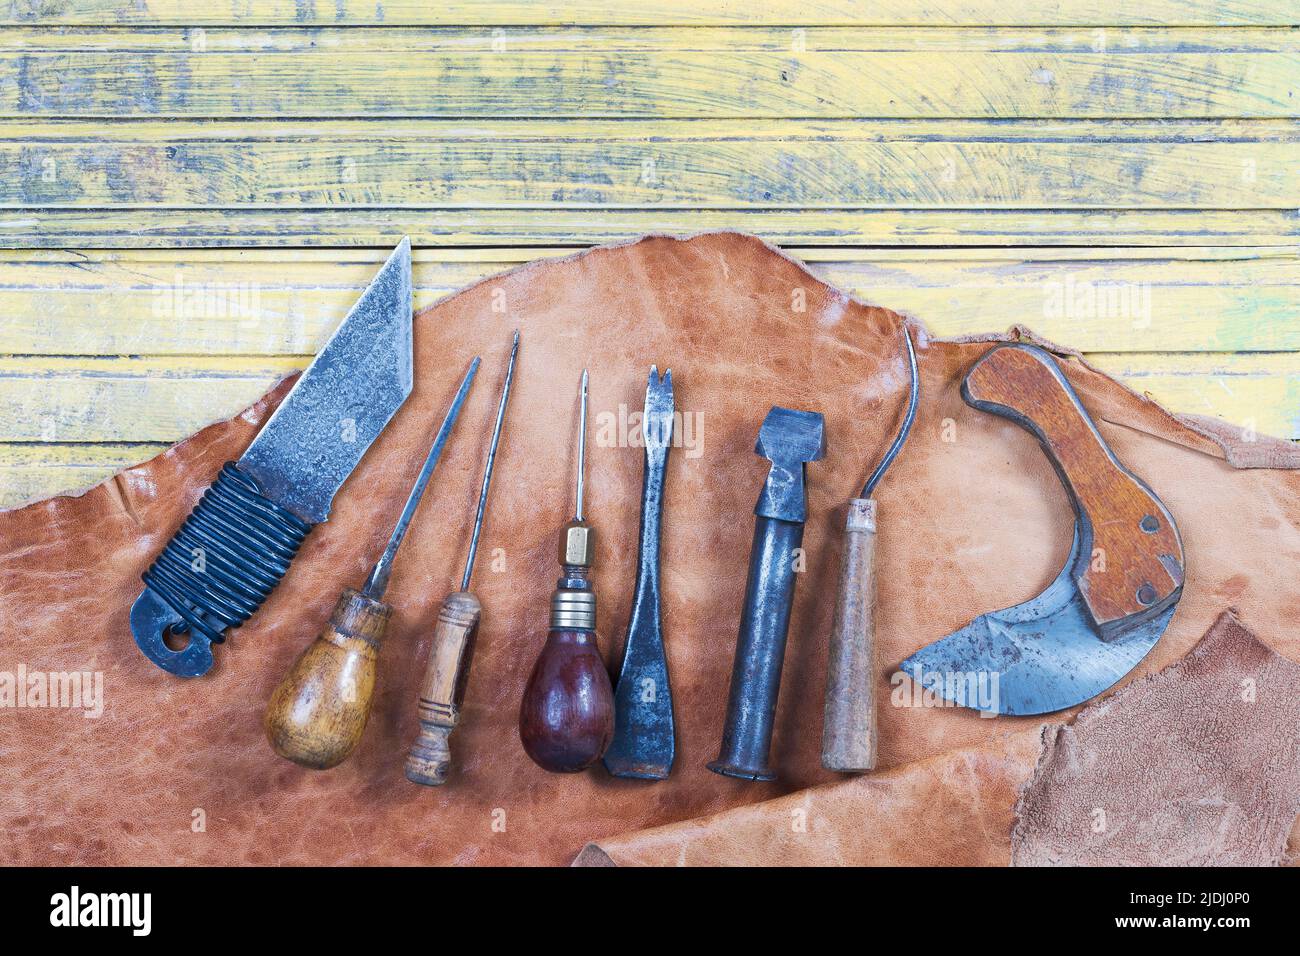 Leather crafting tools Stock Photo by ©haveseen 99363964